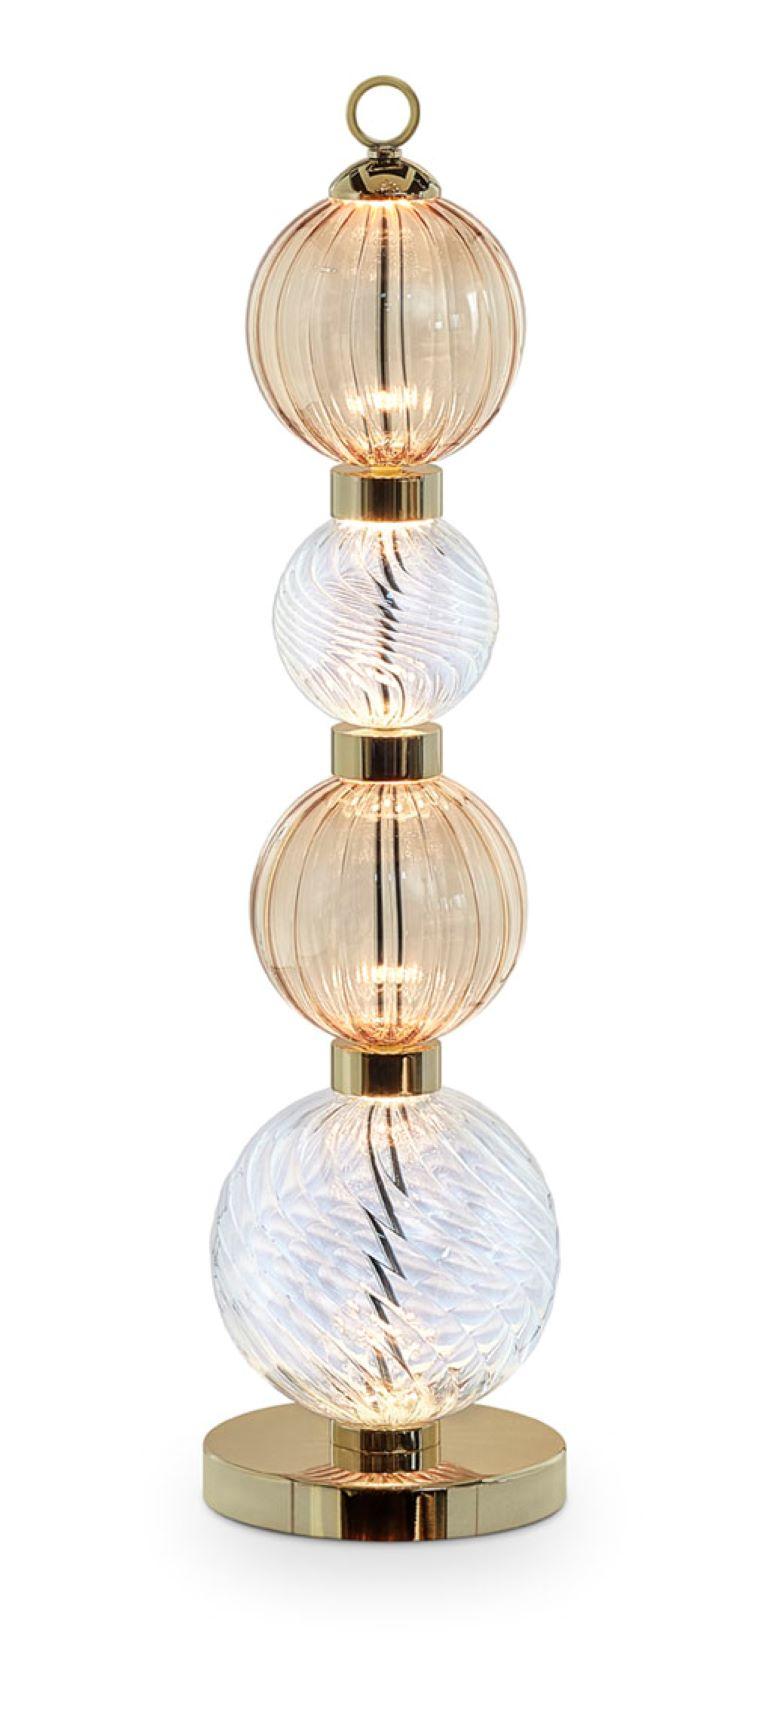 Italian Table Lamp Polished Champagne or Chrome Finish Murano Glass Spheres Customizable For Sale